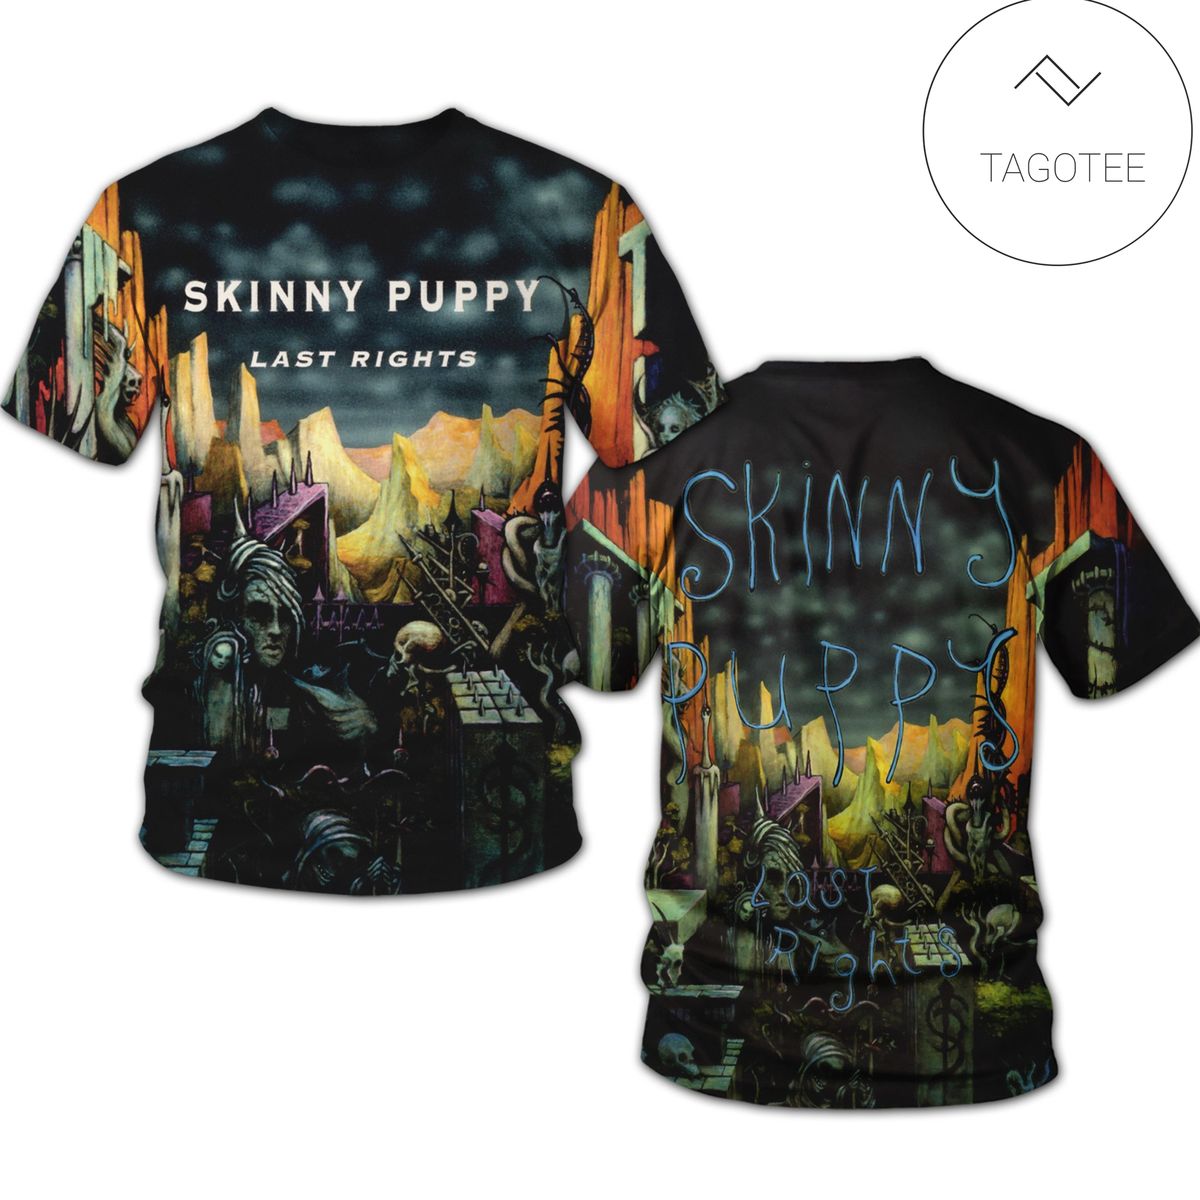 Skinny Puppy Last Rights Album Cover Shirt